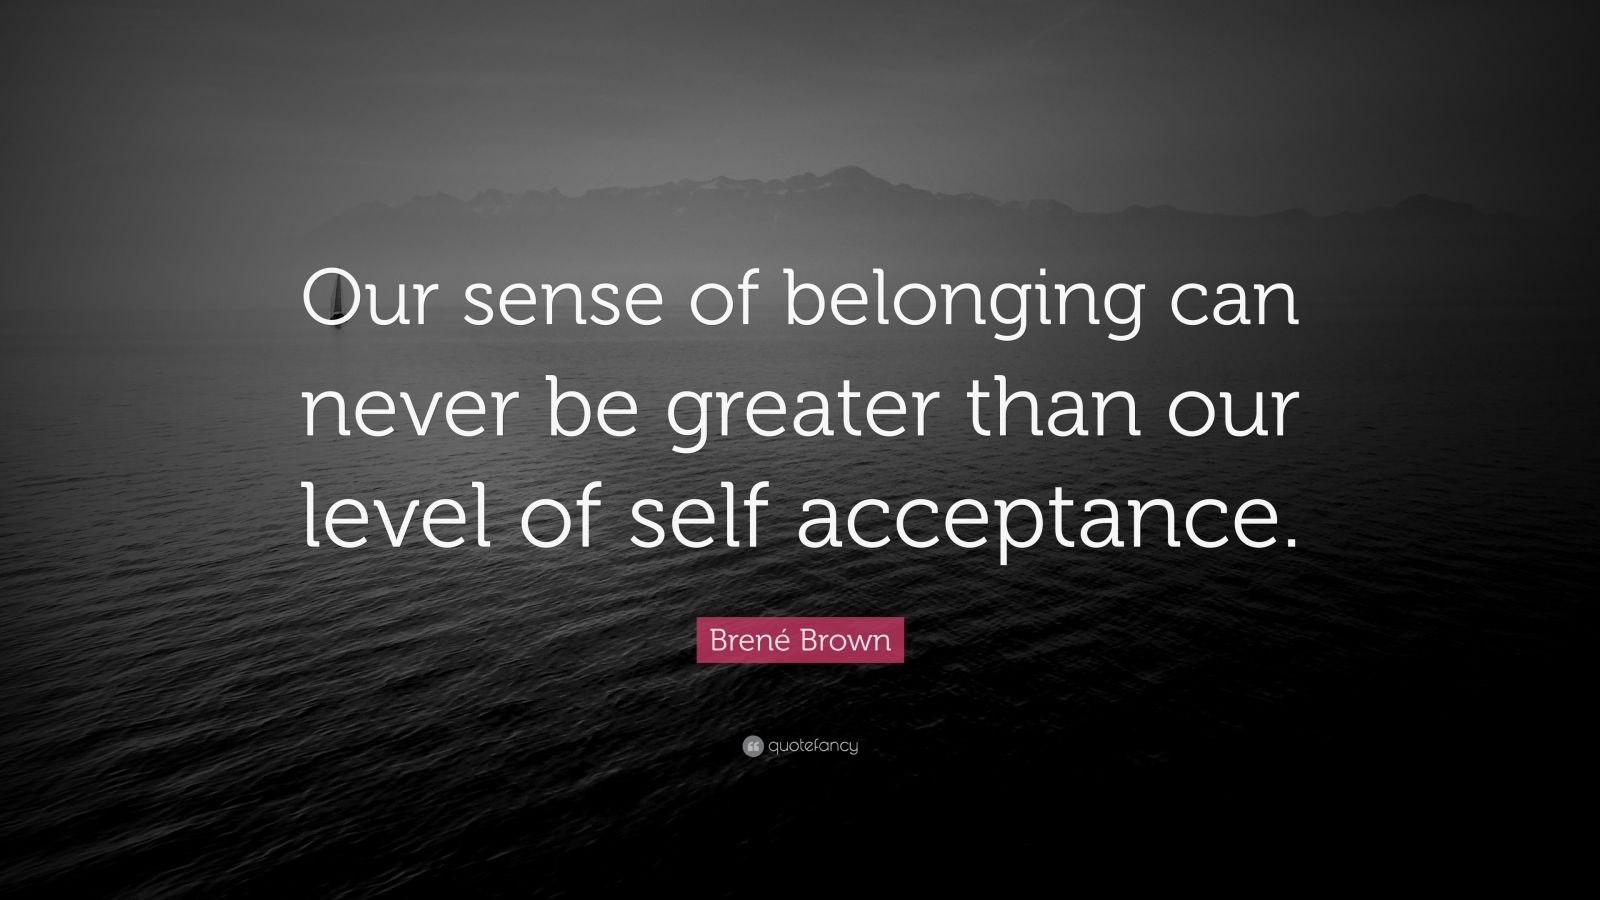 Brené Brown Quote: “Our sense of belonging can never be greater than